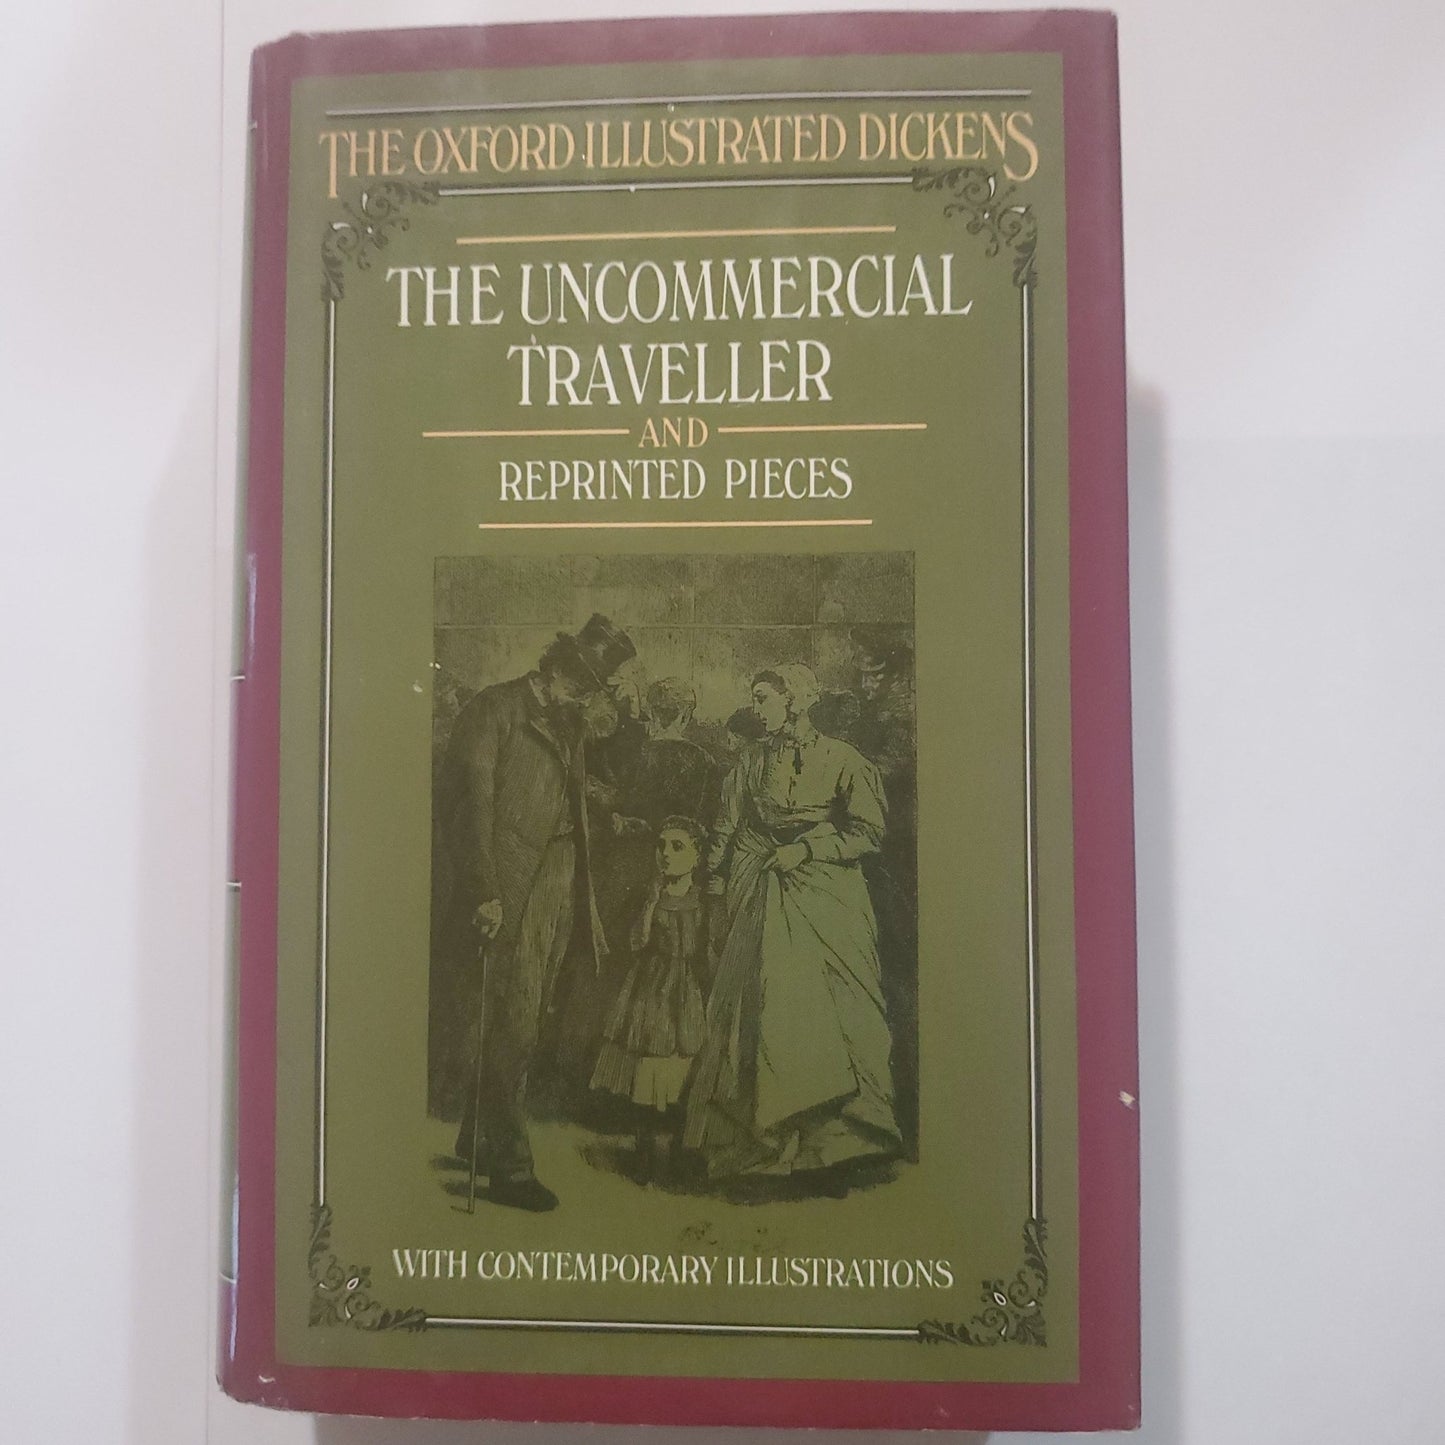 The Uncommercual Traveller and Reprinted Pieces - [ash-ling] Booksellers